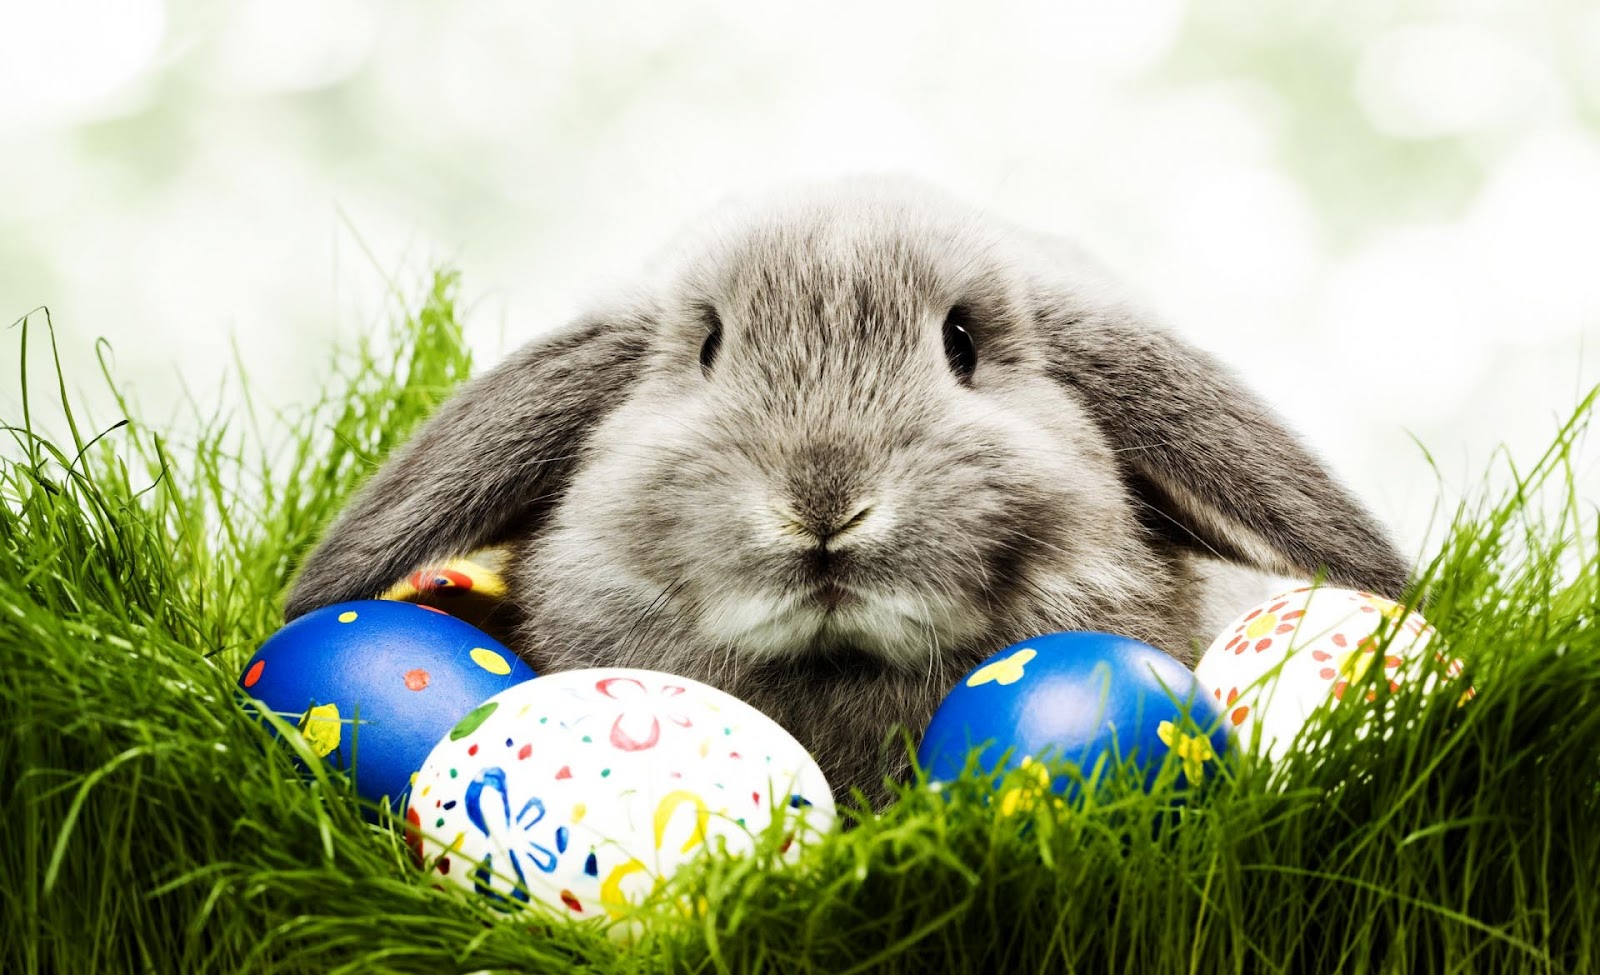 happy easter wallpaper,domestic rabbit,easter egg,rabbit,rabbits and hares,grass